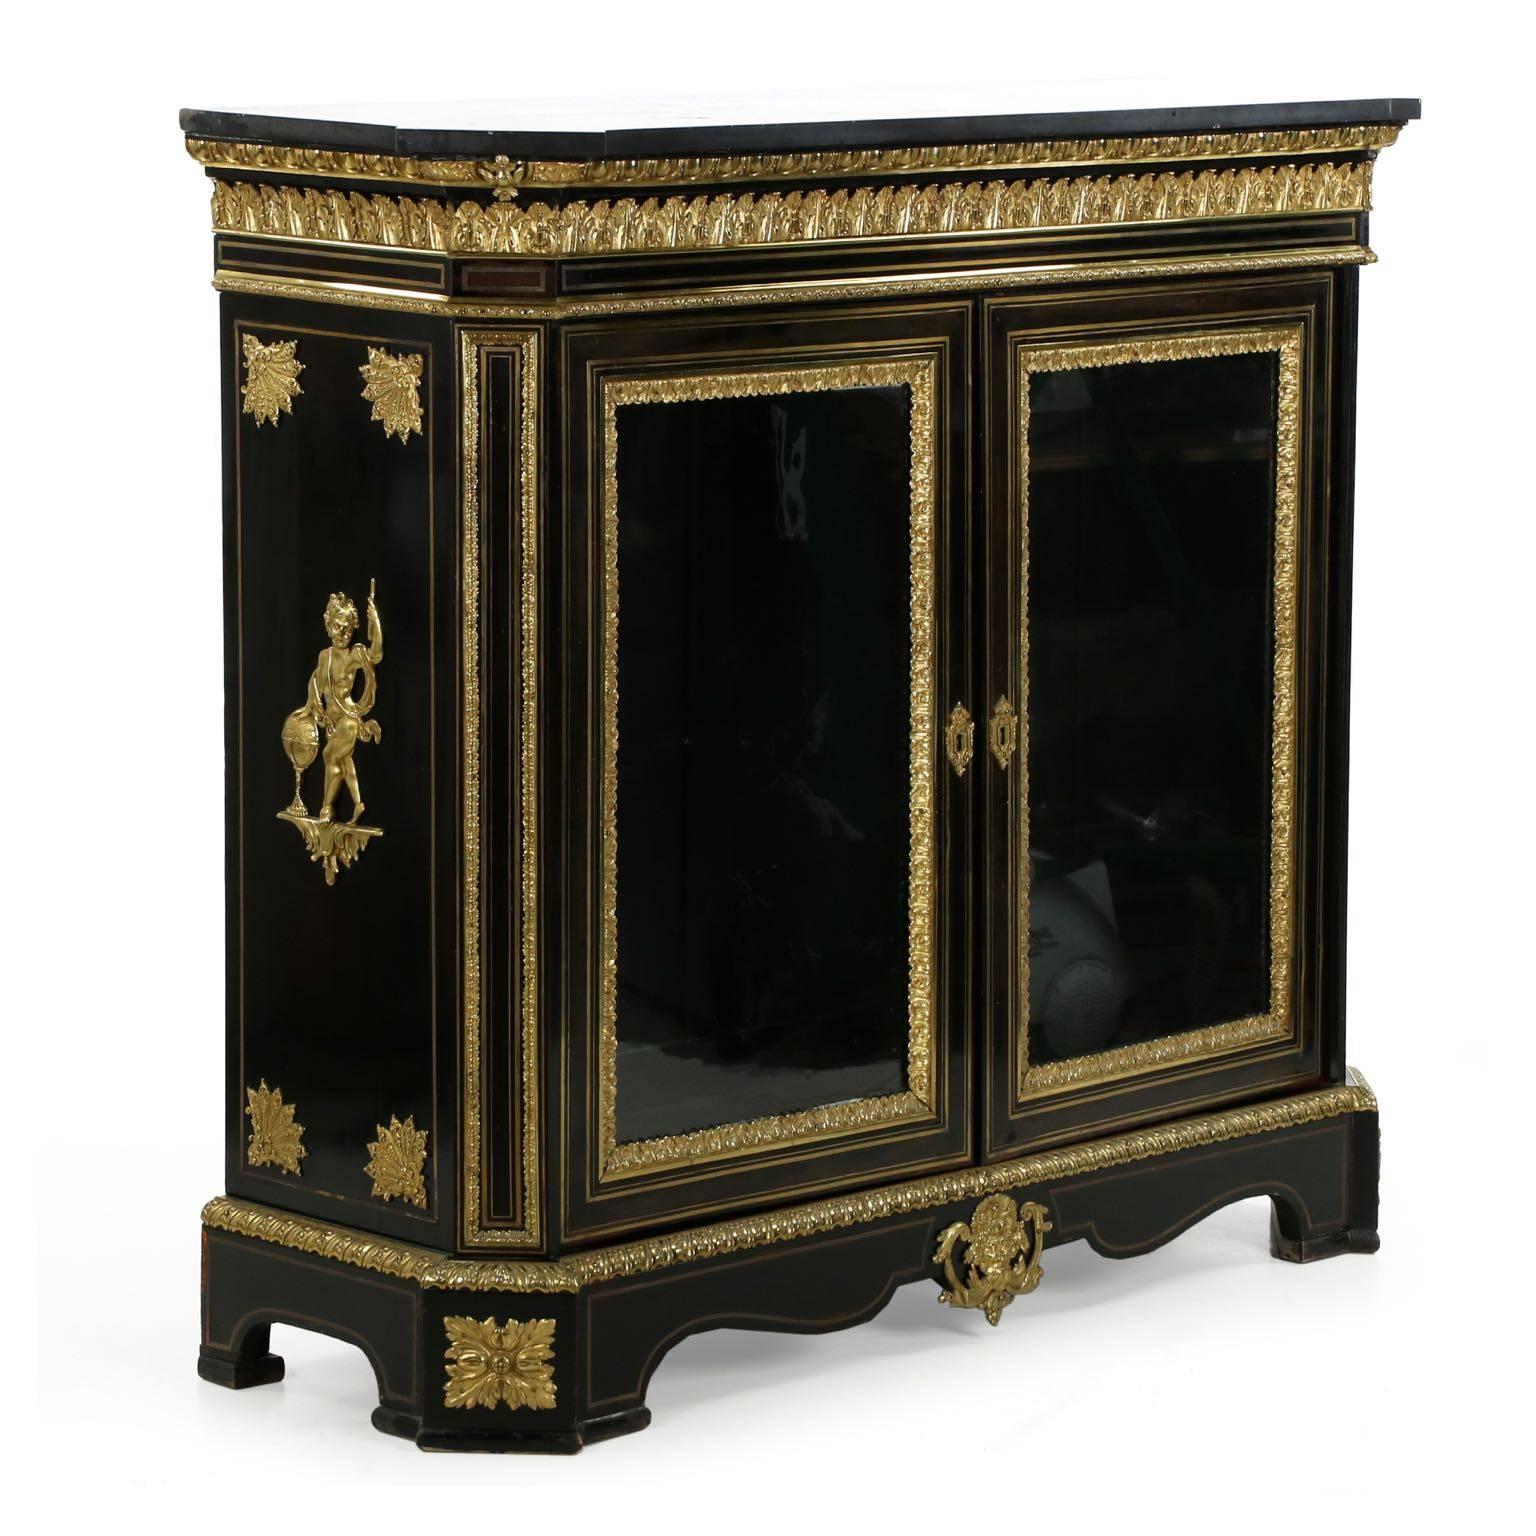 This exceptional cabinet is preserved in truly remarkable condition, where ebonized surfaces will generally fade rather unattractively and brass work tends to dislodge from shrinking and moisture, this piece has remained relatively untouched by the